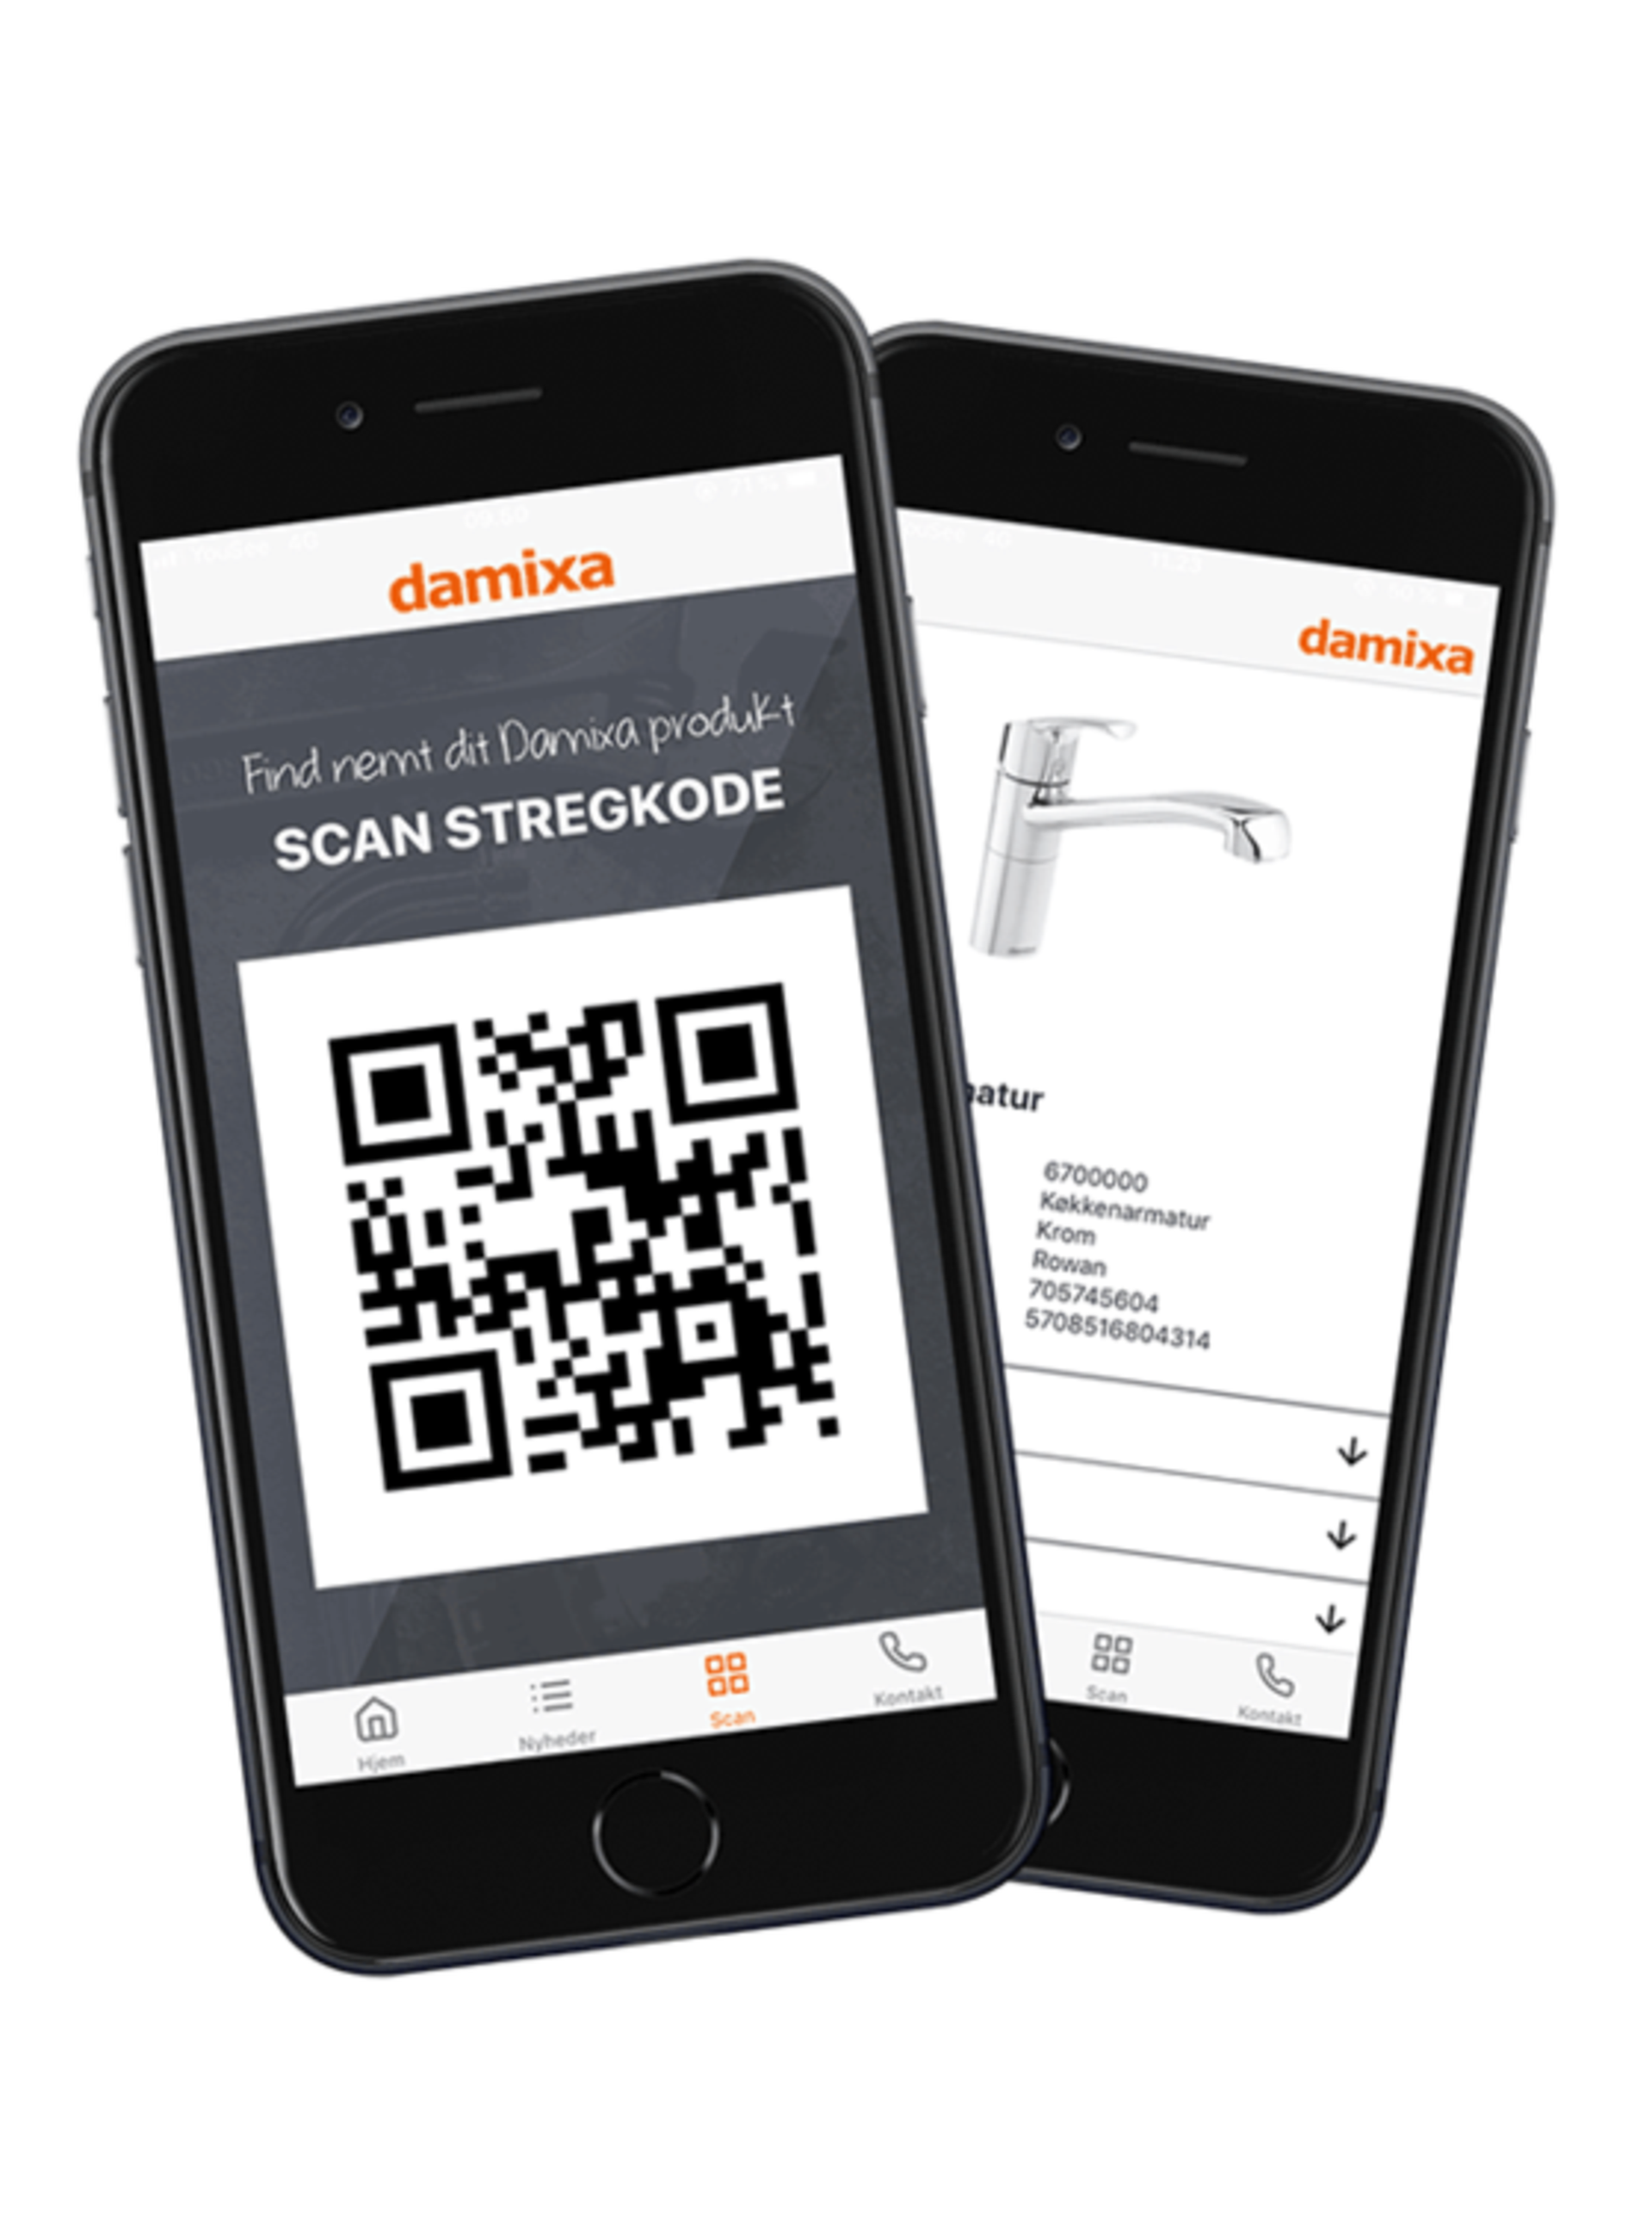 Get access to relevant information with the new Damixa app